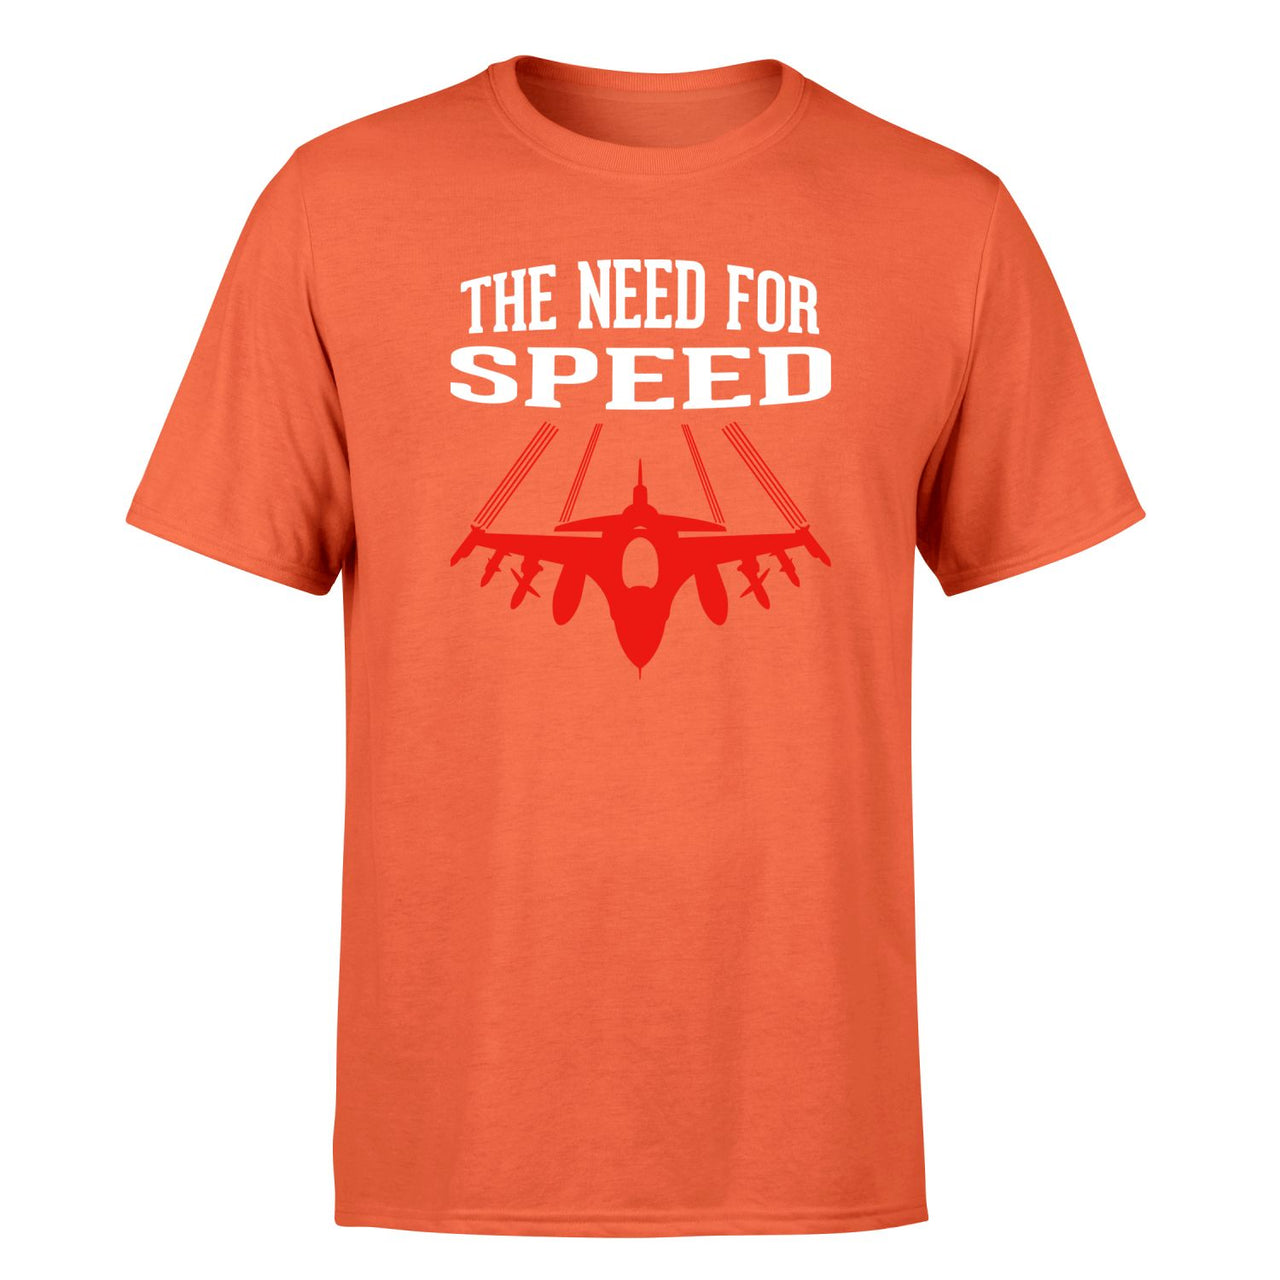 The Need For Speed Designed T-Shirts